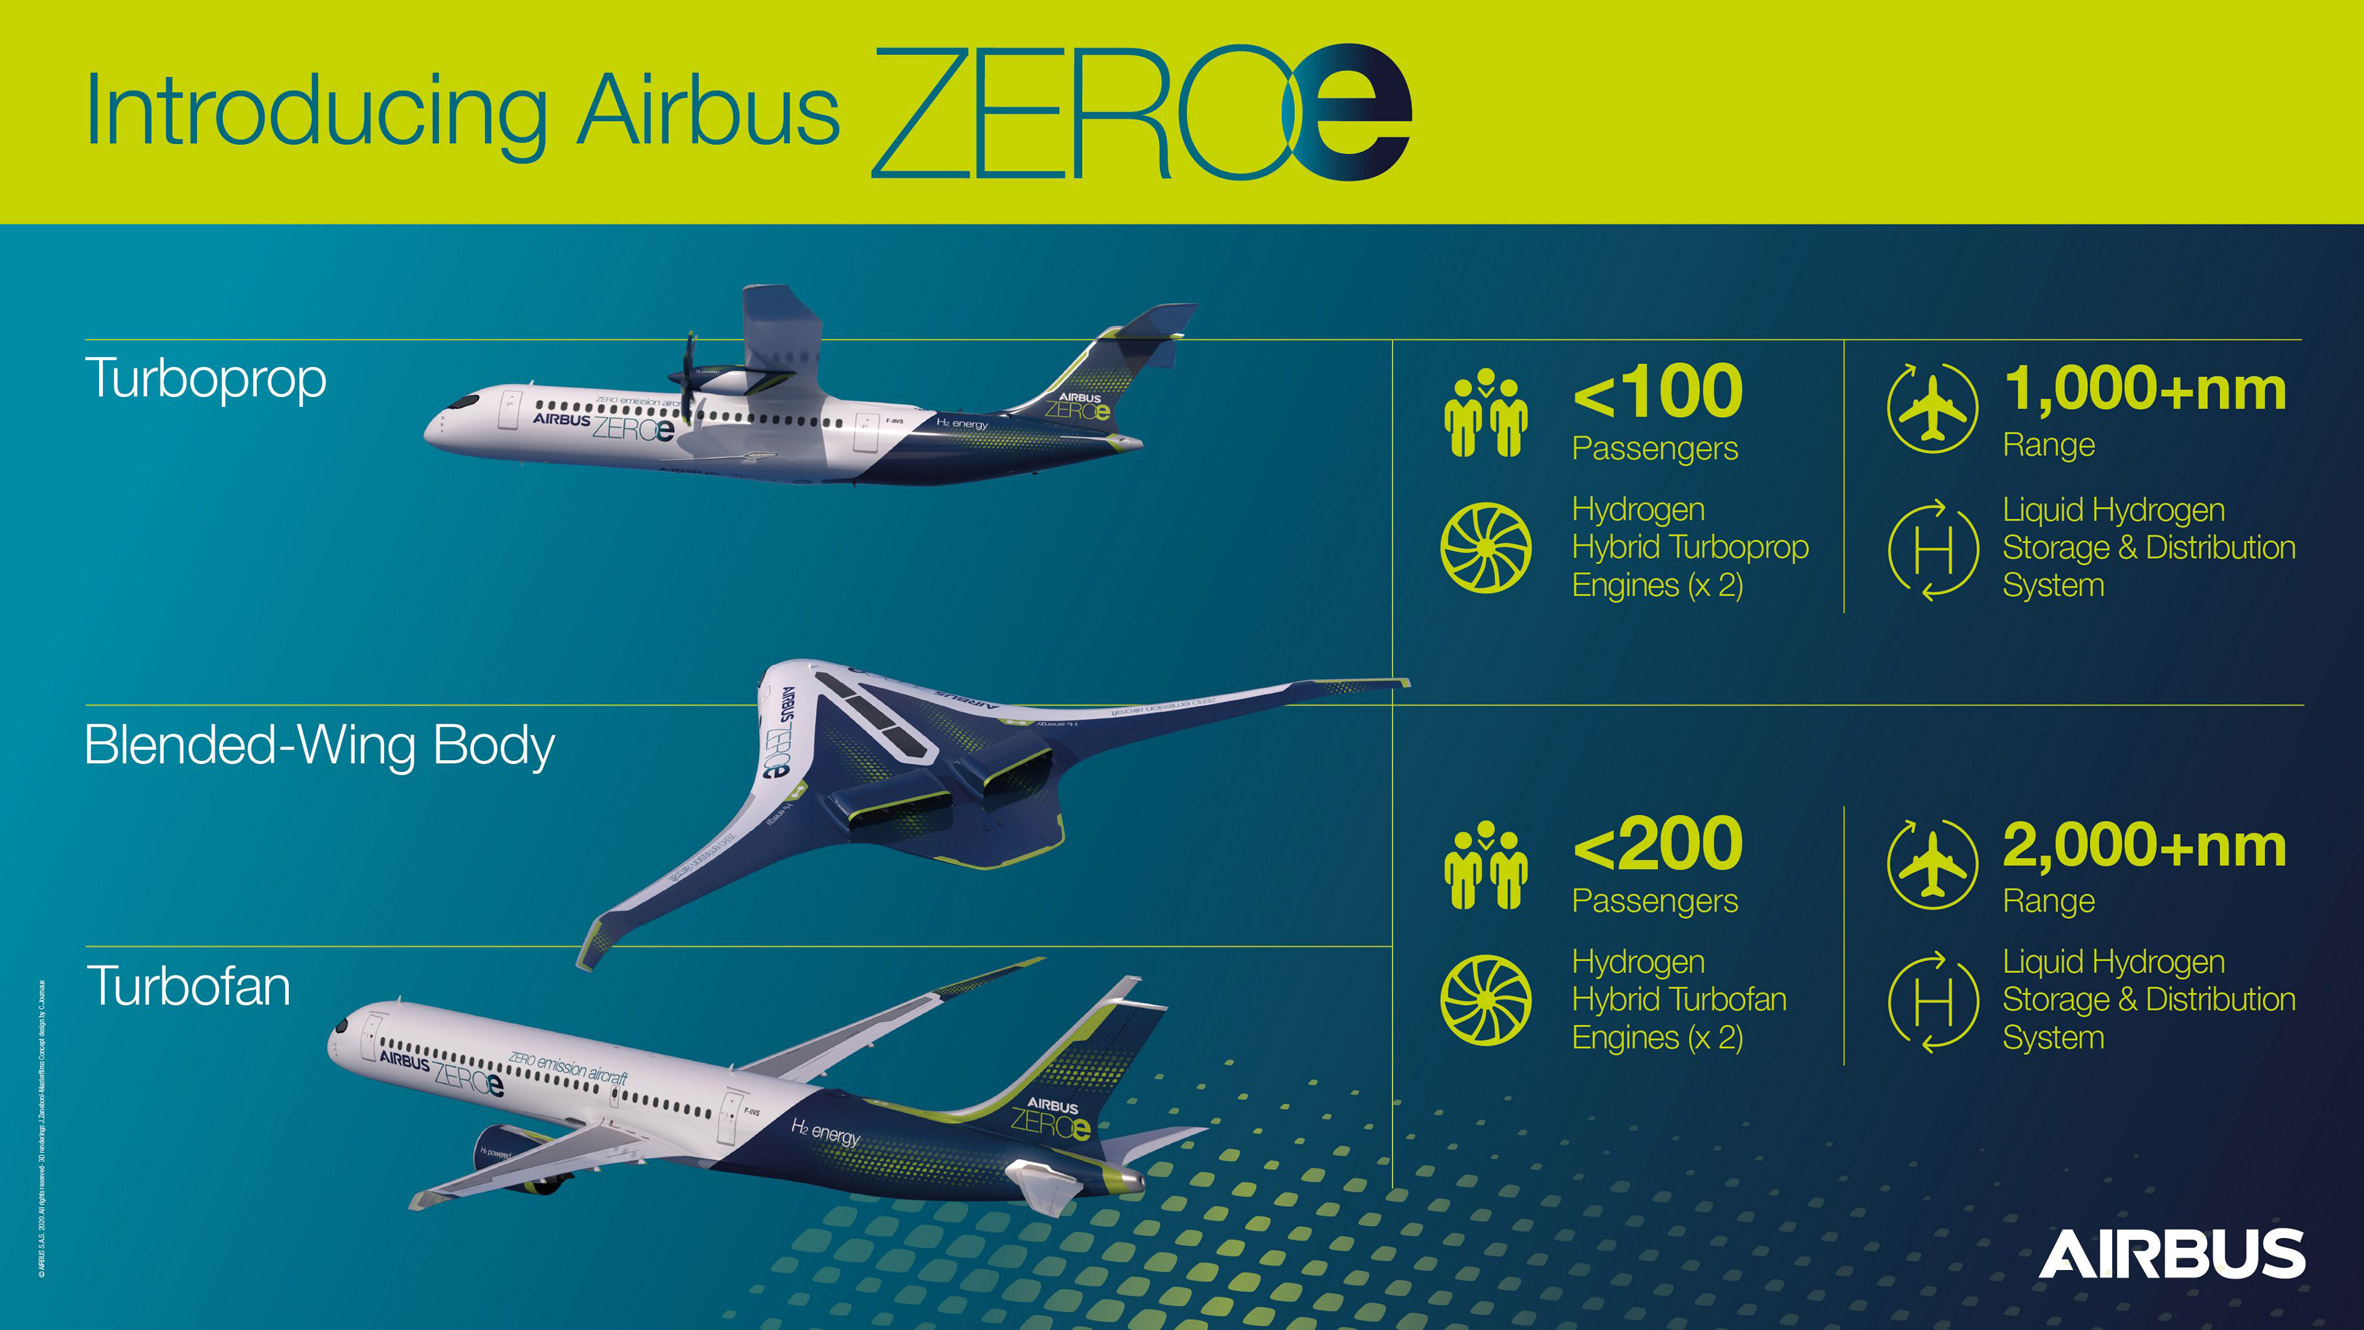 Airbus' new concept for a zero-emission aircraft